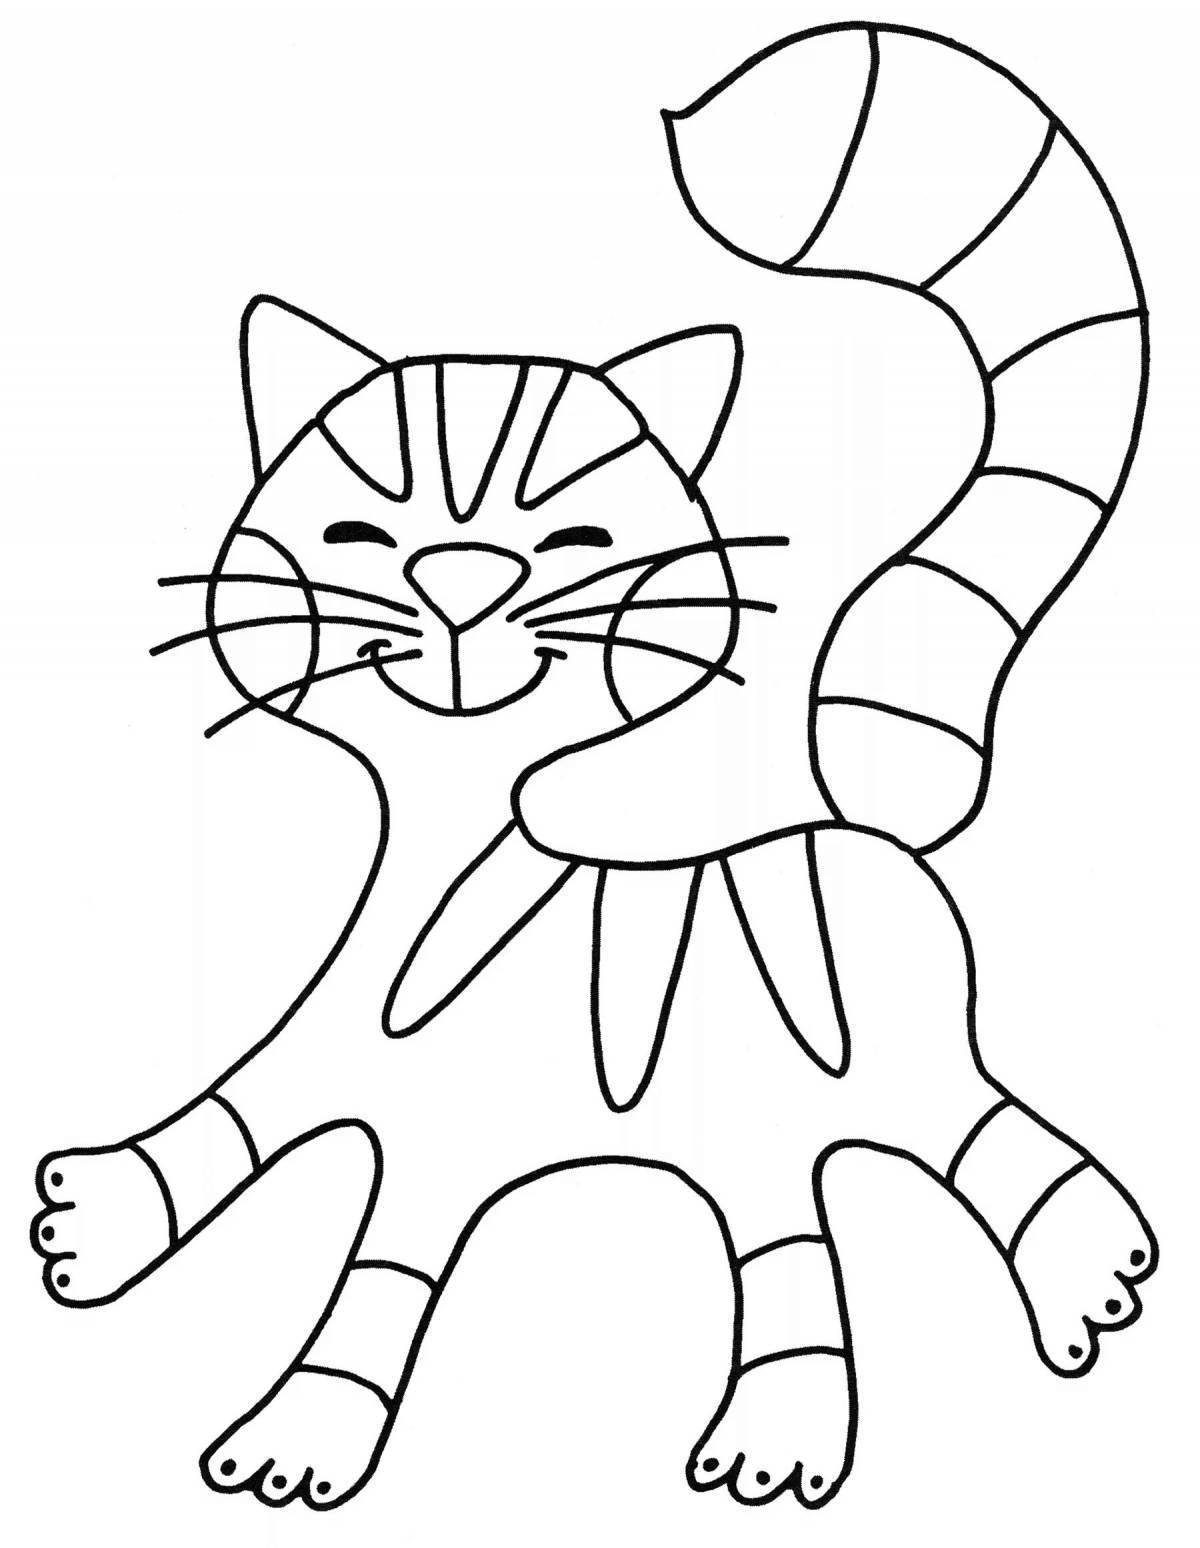 Coloring book inquisitive tabby cat